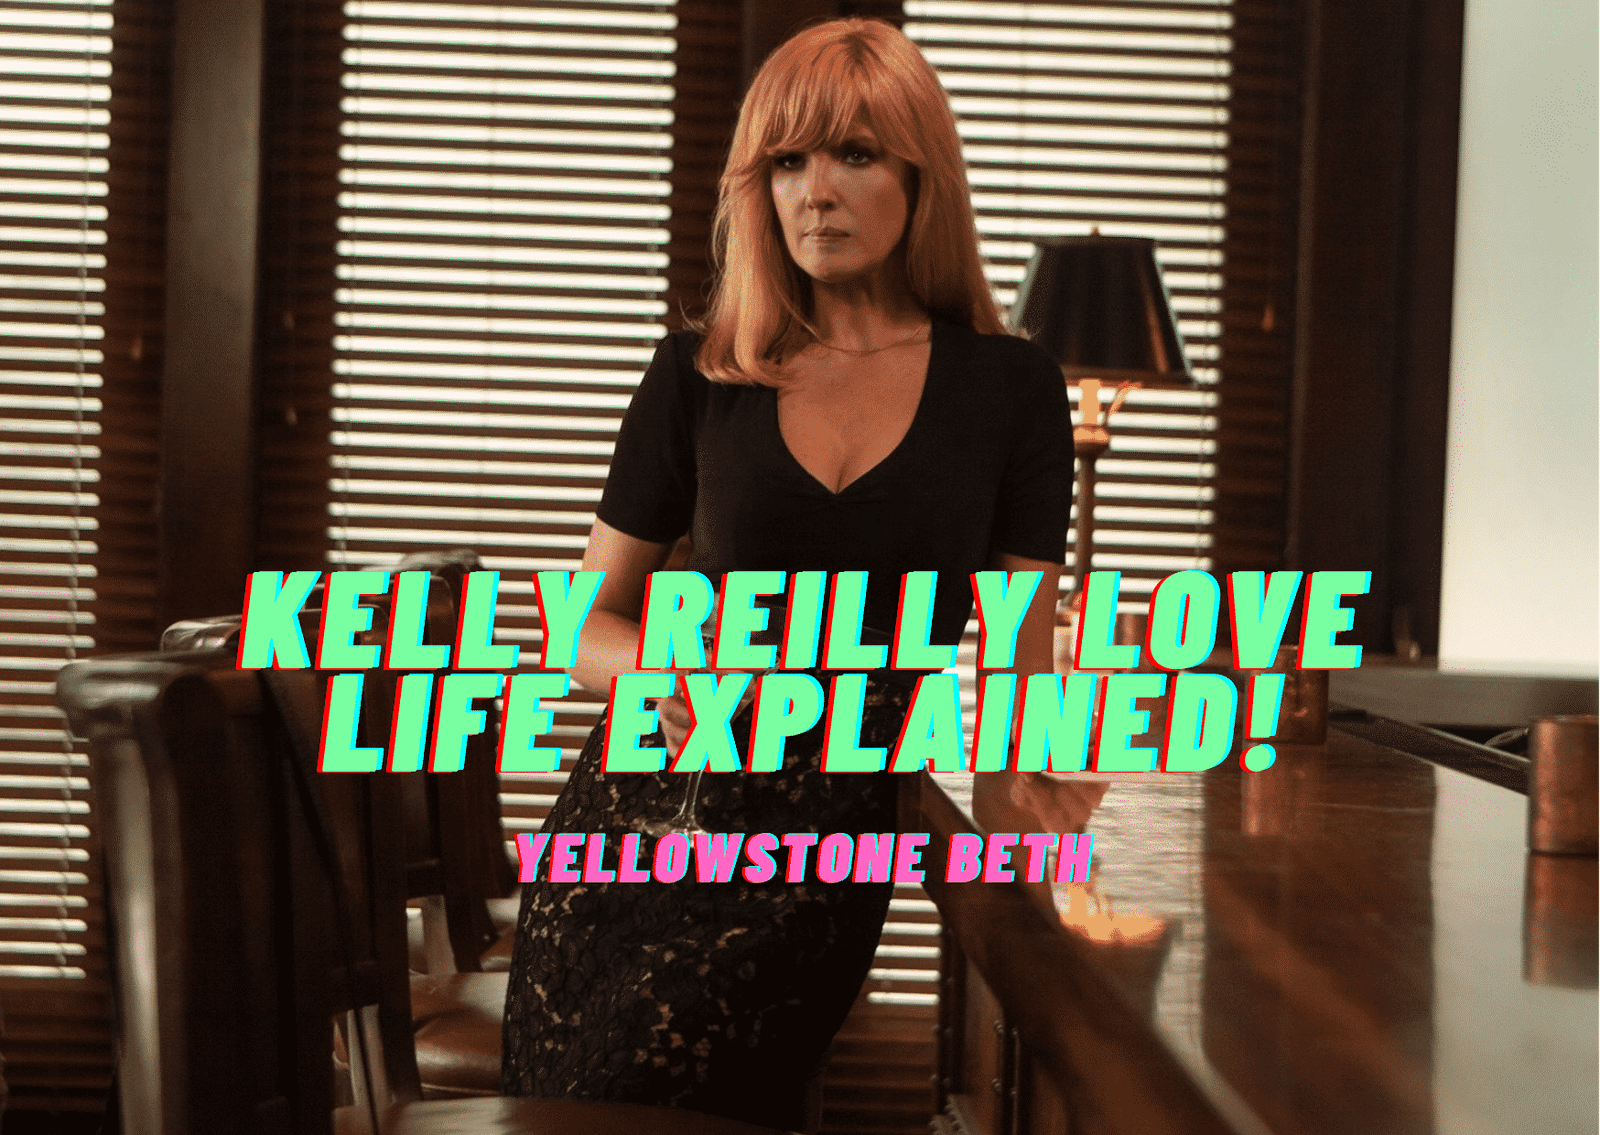 Kelly Reilly Love Life Explained! - Who is Yellowstone Beth Dating?